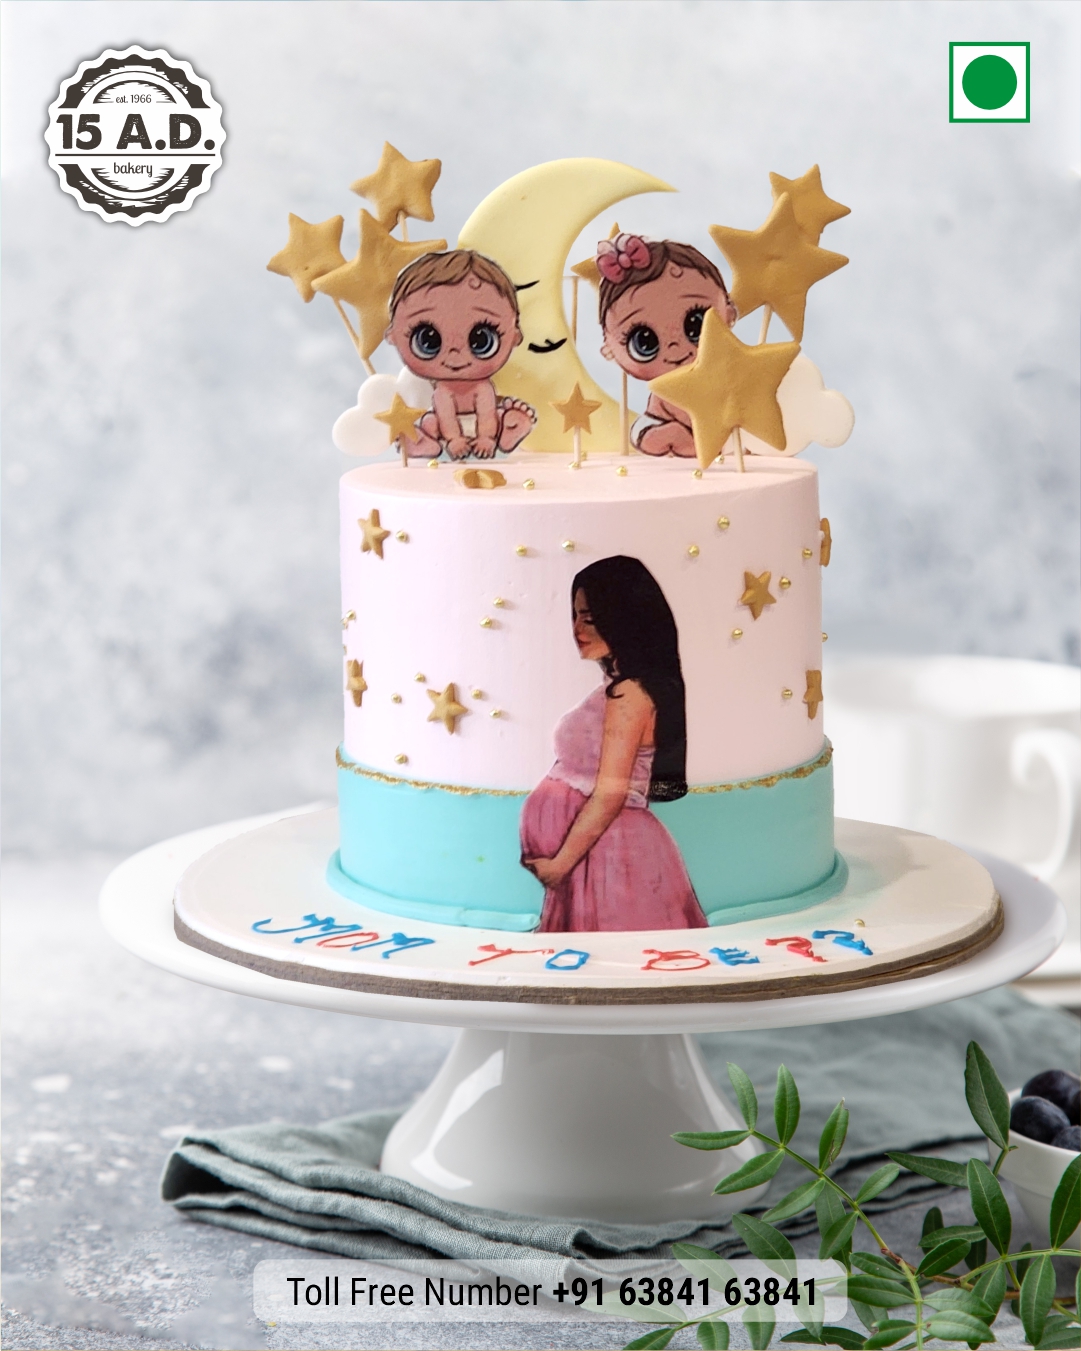 Baby Shower Cake by 15 AD Bakery